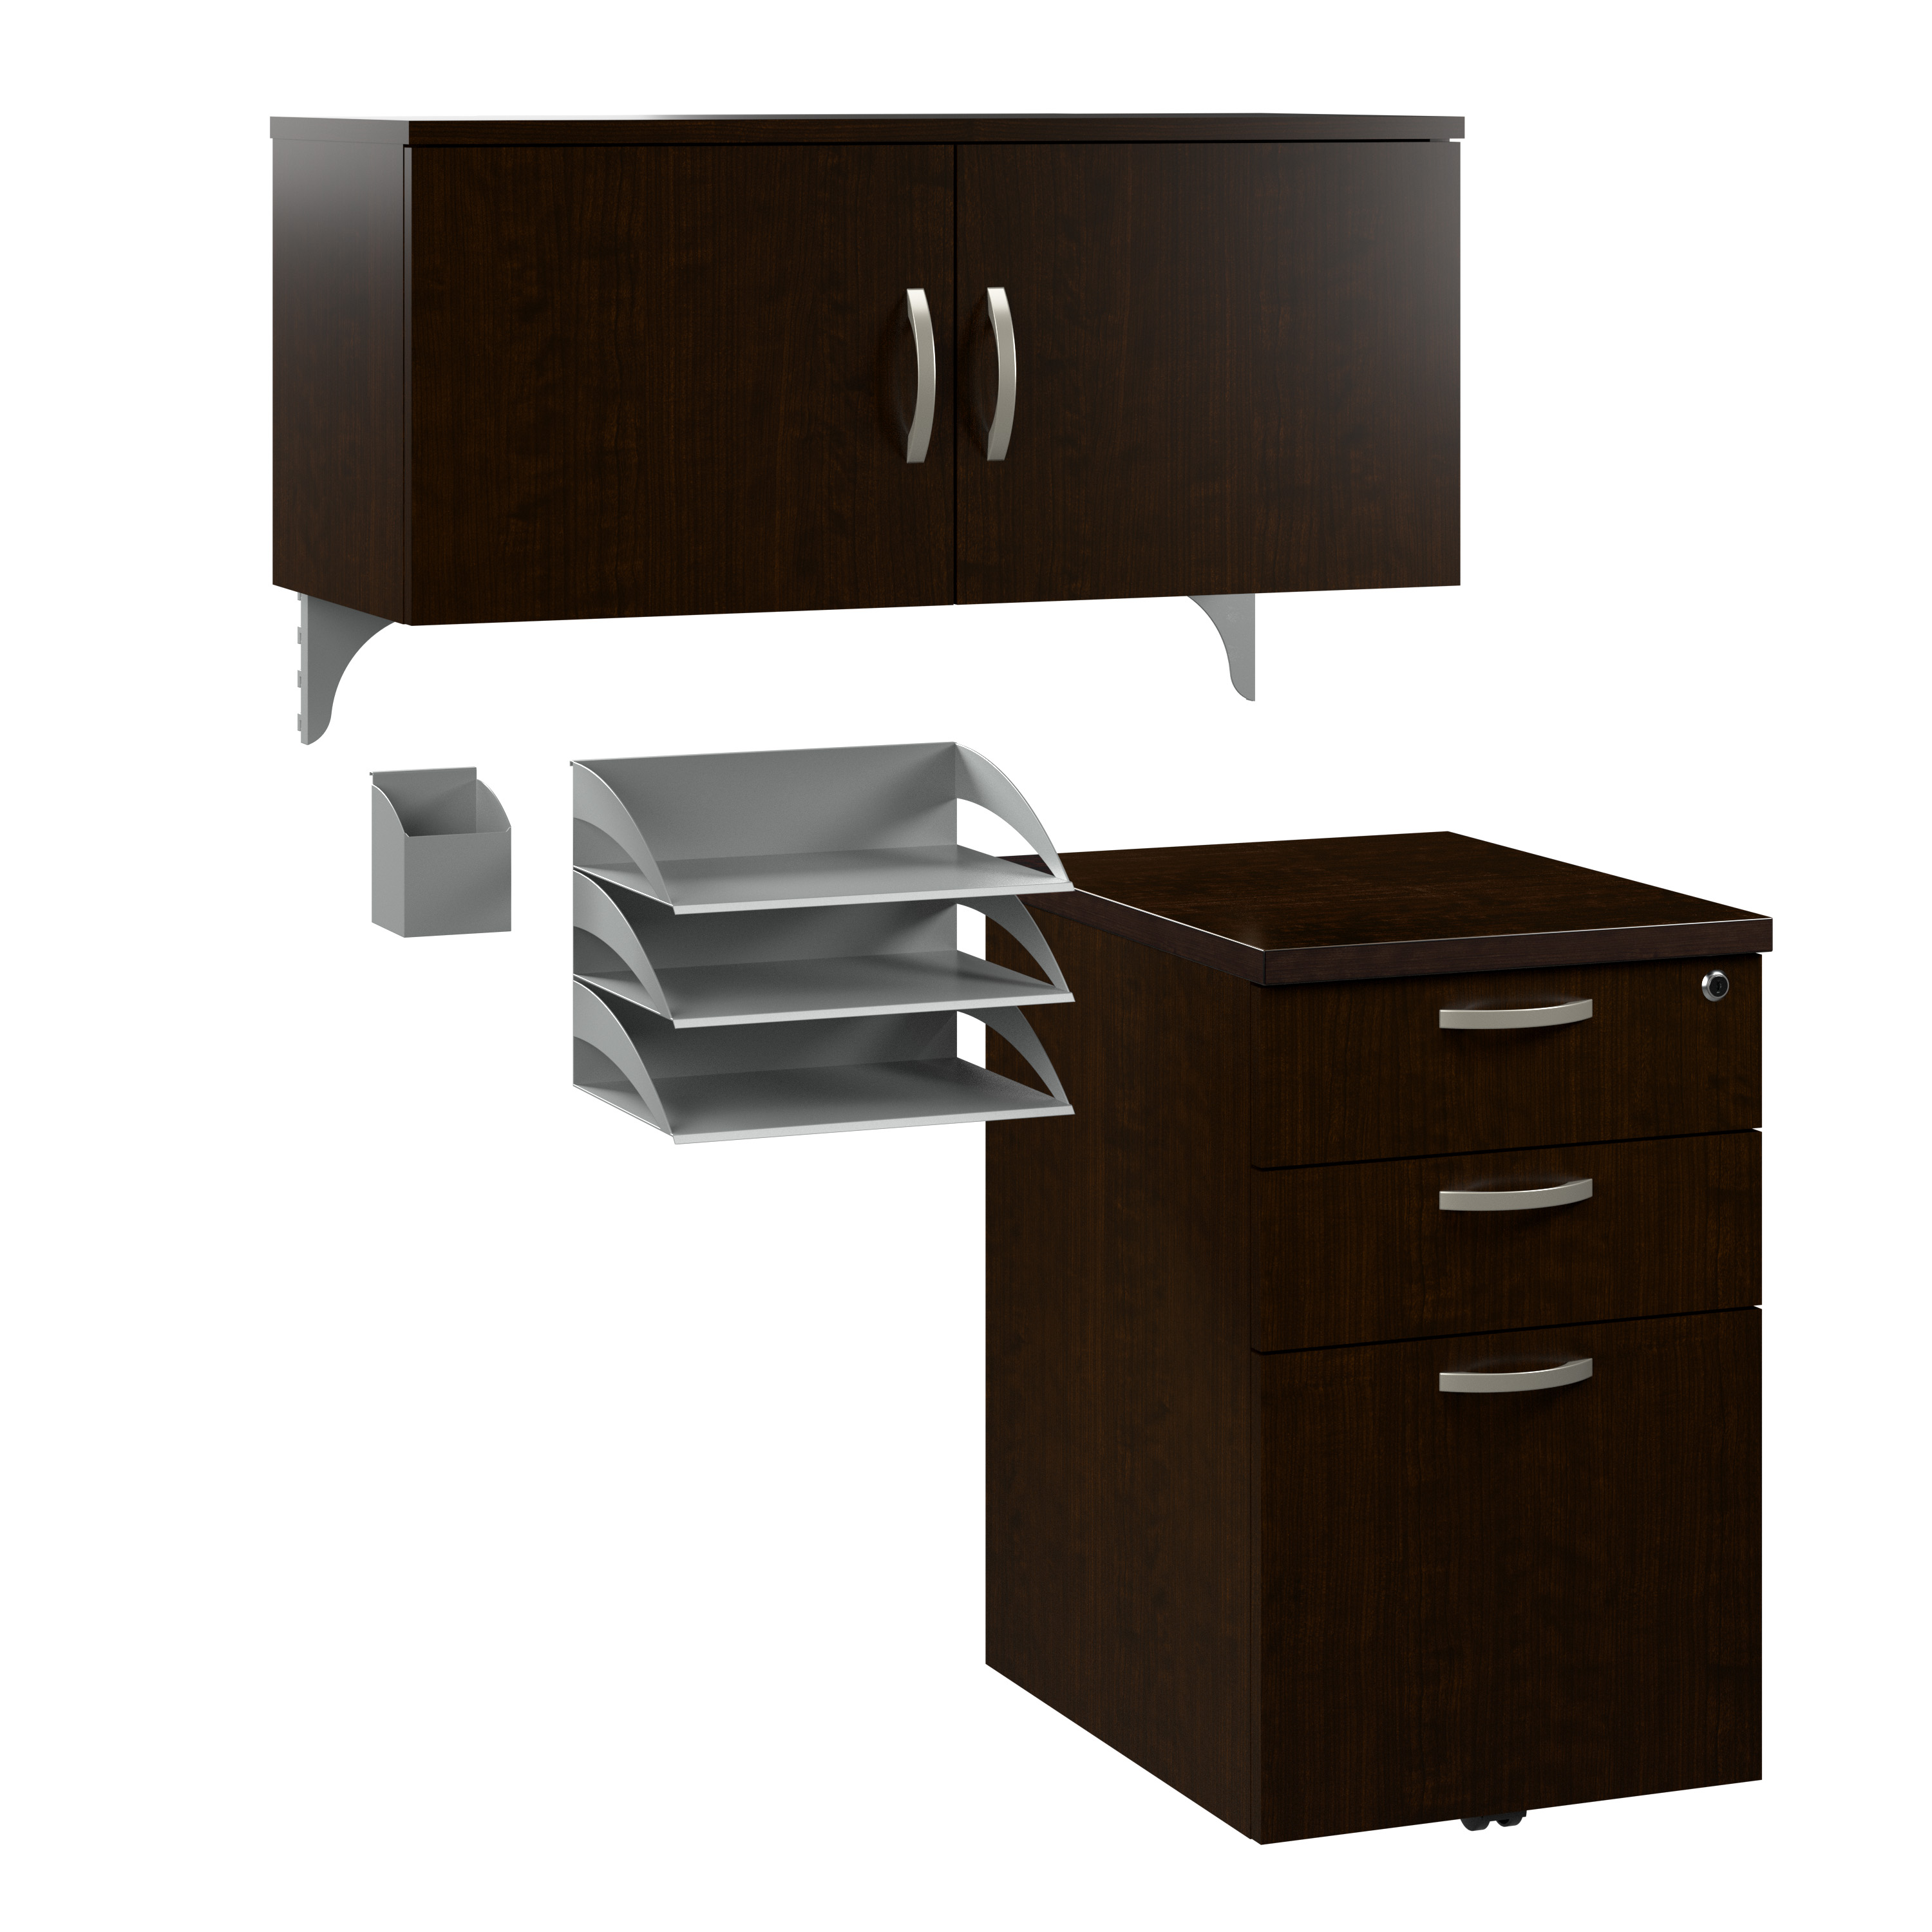 Shop Bush Business Furniture Office in an Hour Cubicle Storage with Cabinet, Drawers, Paper Tray, and Pencil Holder 02 WC36890-03K #color_mocha cherry